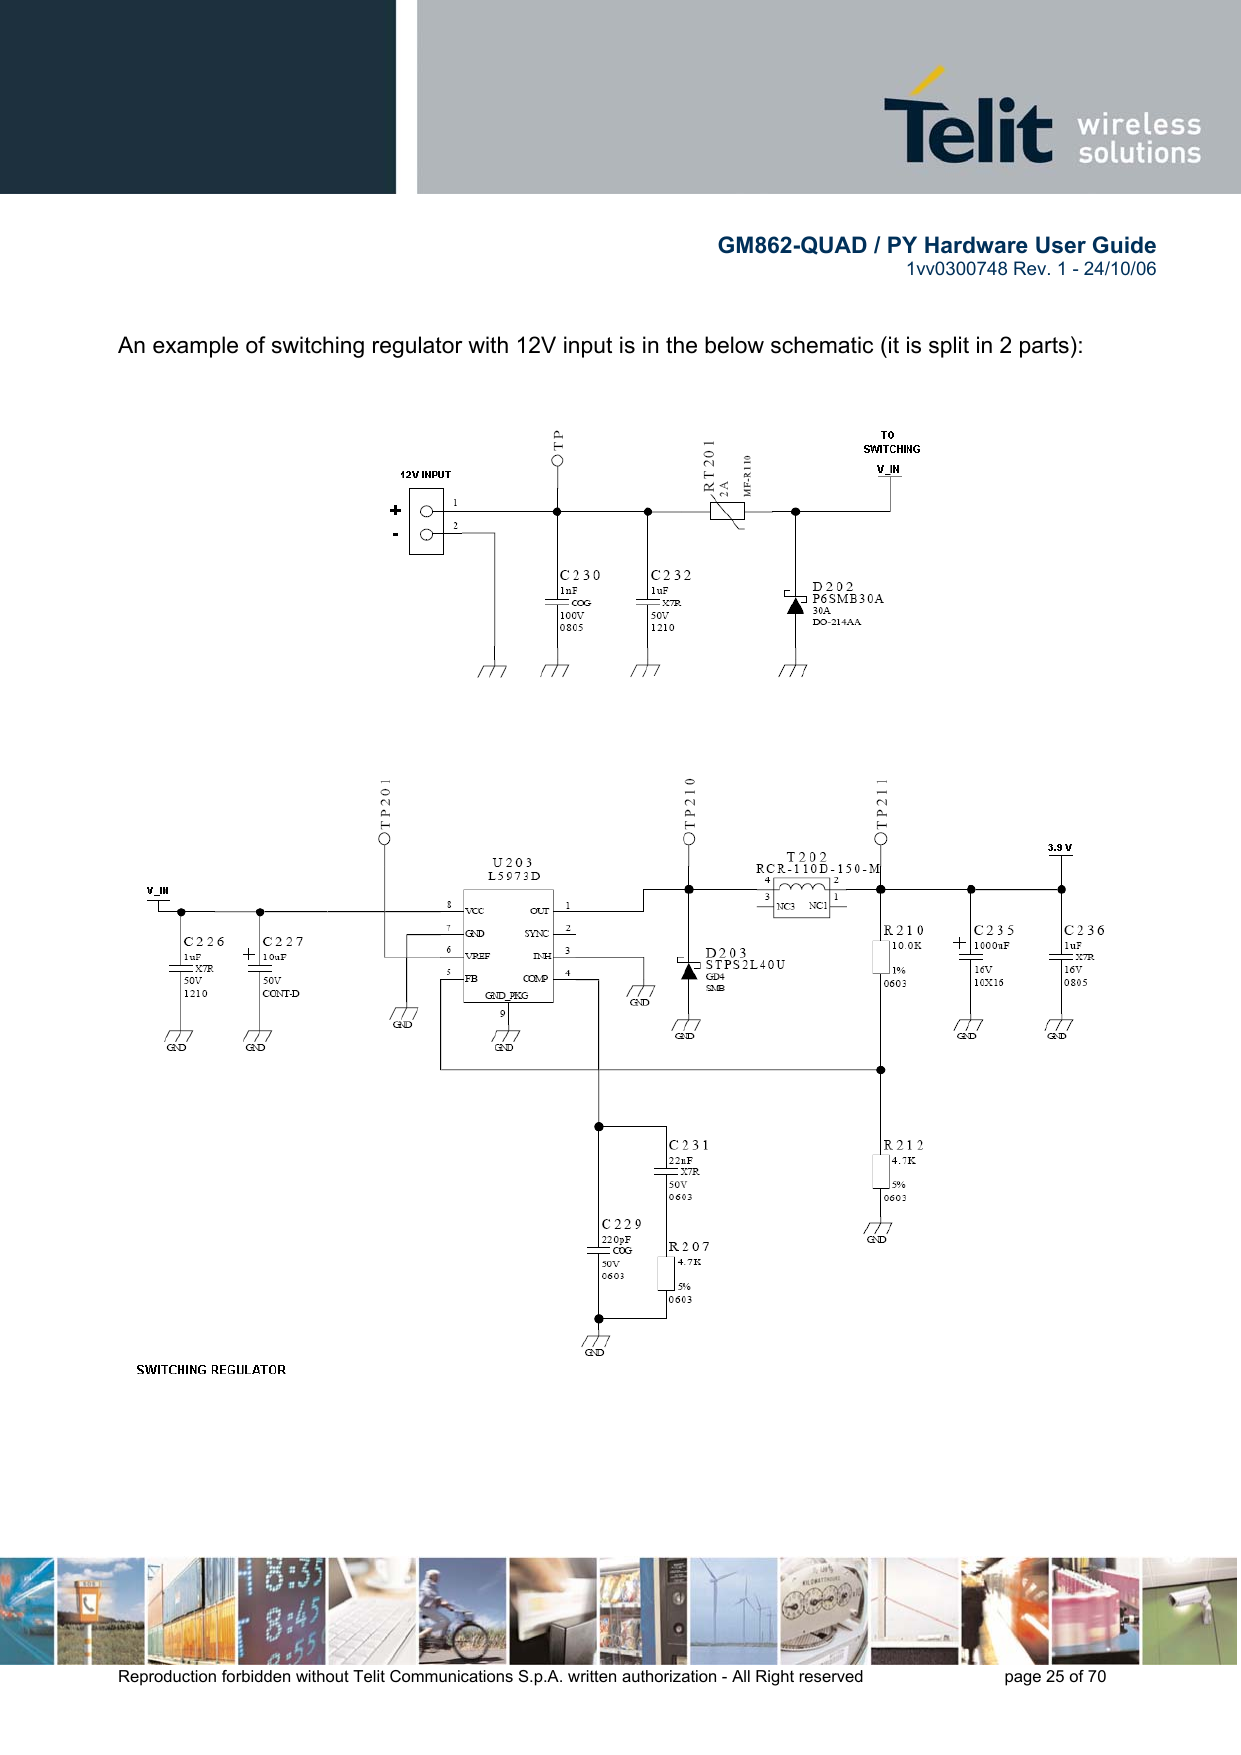        GM862-QUAD / PY Hardware User Guide   1vv0300748 Rev. 1 - 24/10/06    Reproduction forbidden without Telit Communications S.p.A. written authorization - All Right reserved    page 25 of 70    An example of switching regulator with 12V input is in the below schematic (it is split in 2 parts):       